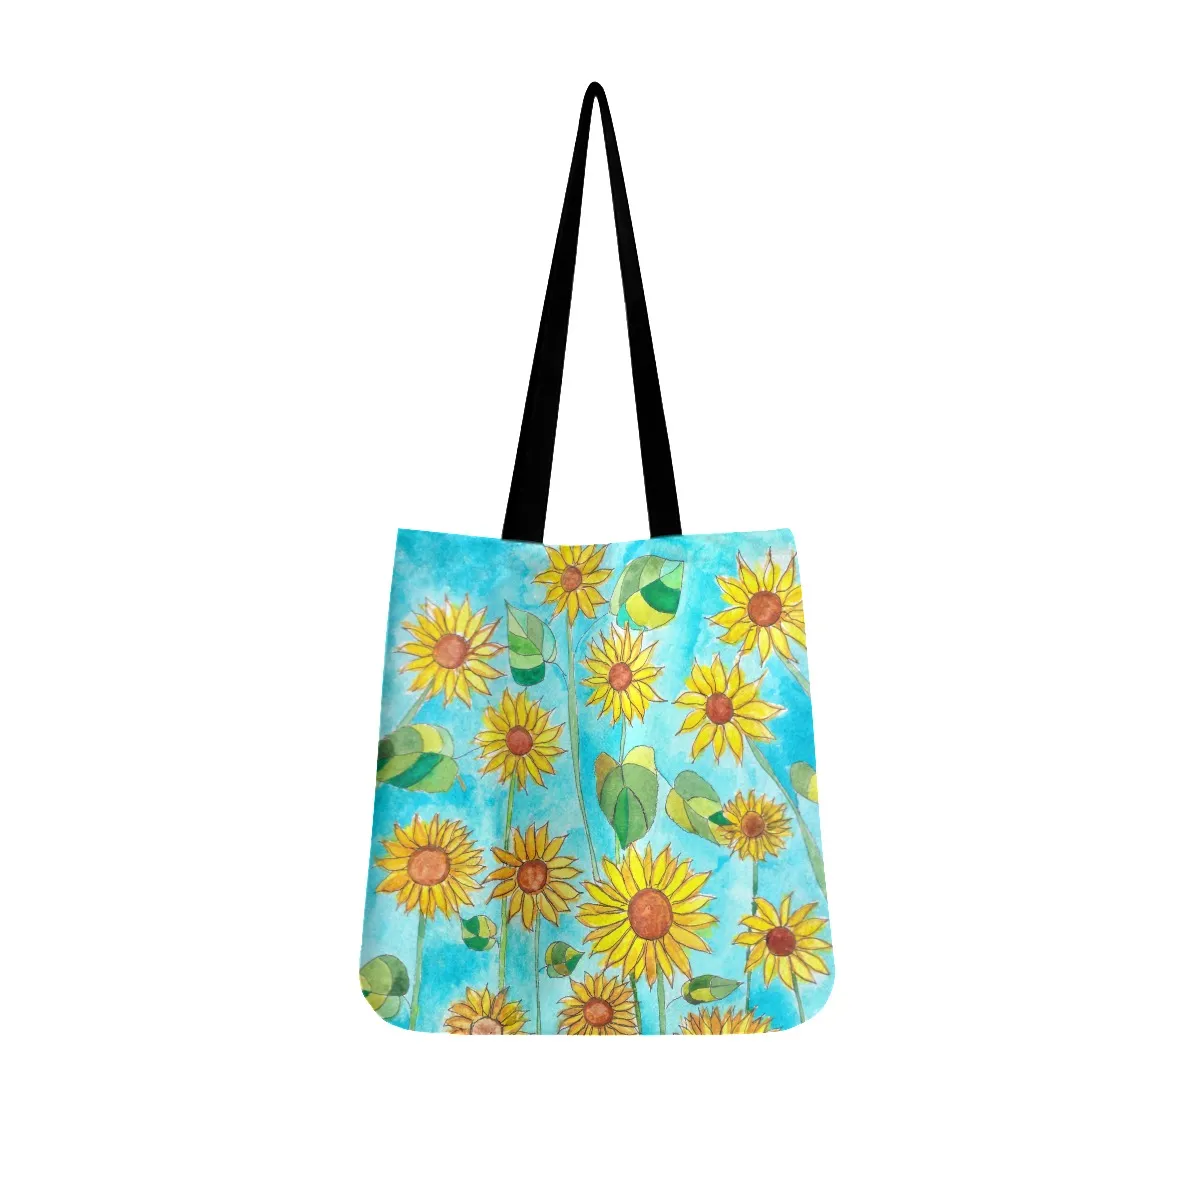 diy Cloth Tote Bags custom men women Cloth Bags clutch bags totes lady backpack professional sunflower Versatile personalized couple gifts unique 26772